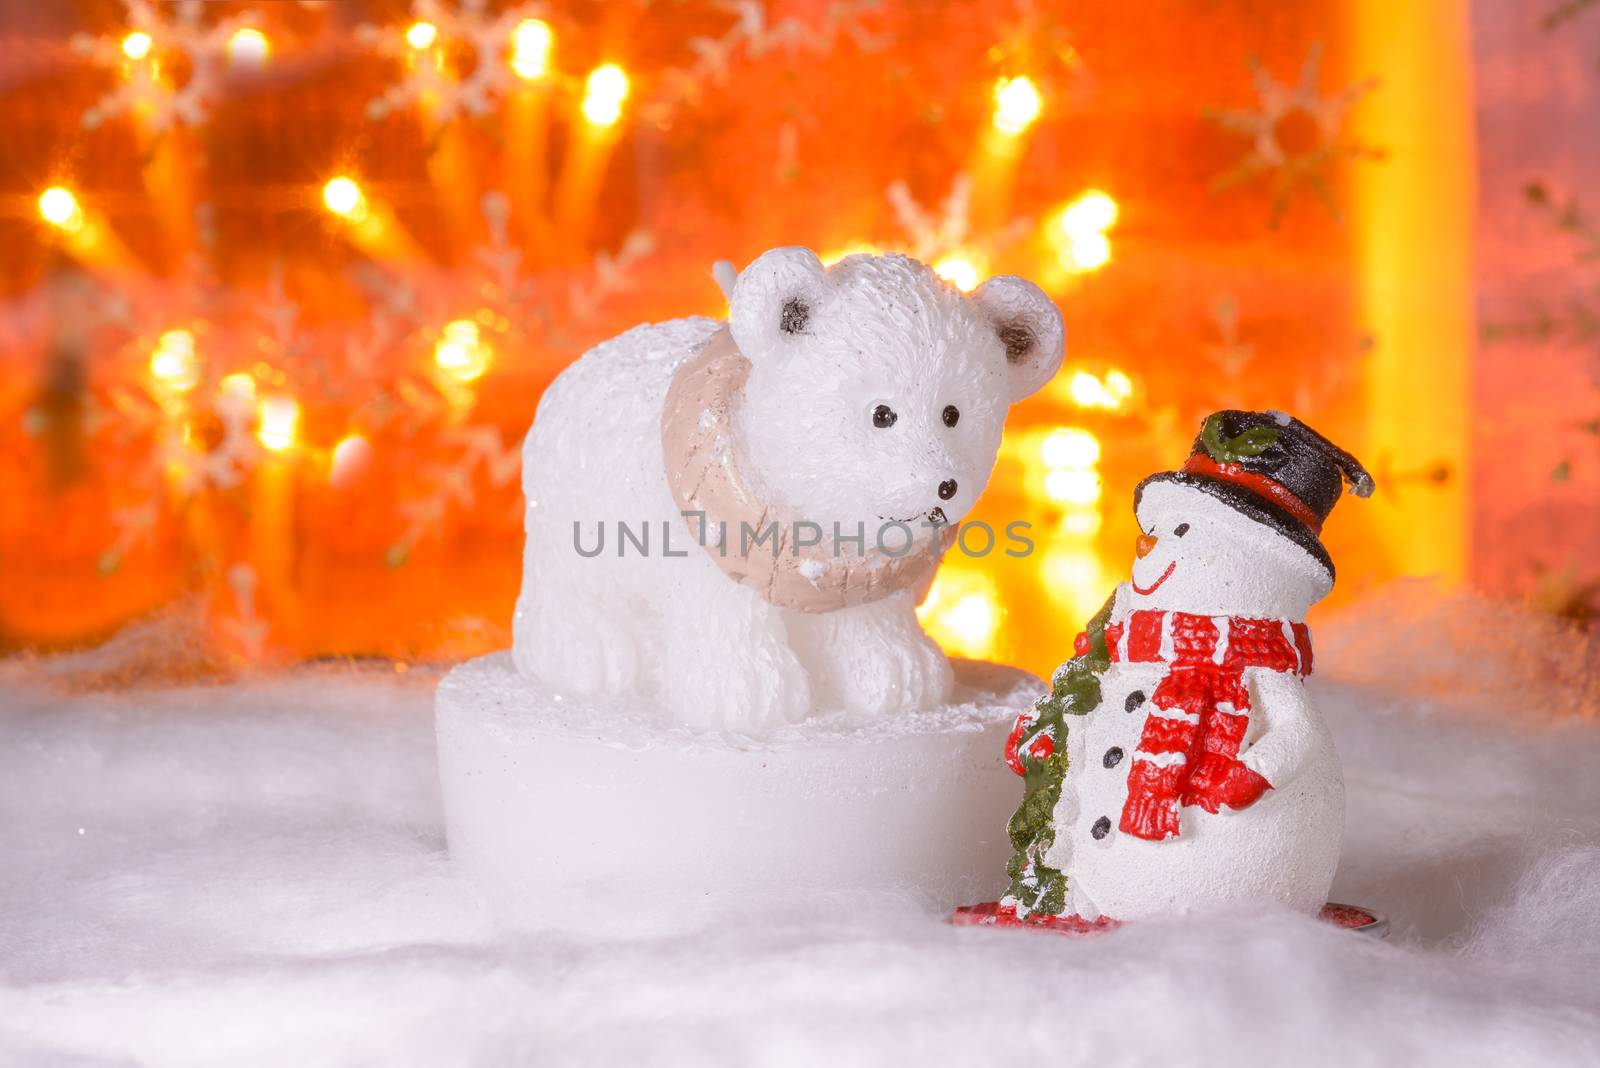 Snowman with polar bear, Happy New Year 2017, Christmas, bright defocused lights in background